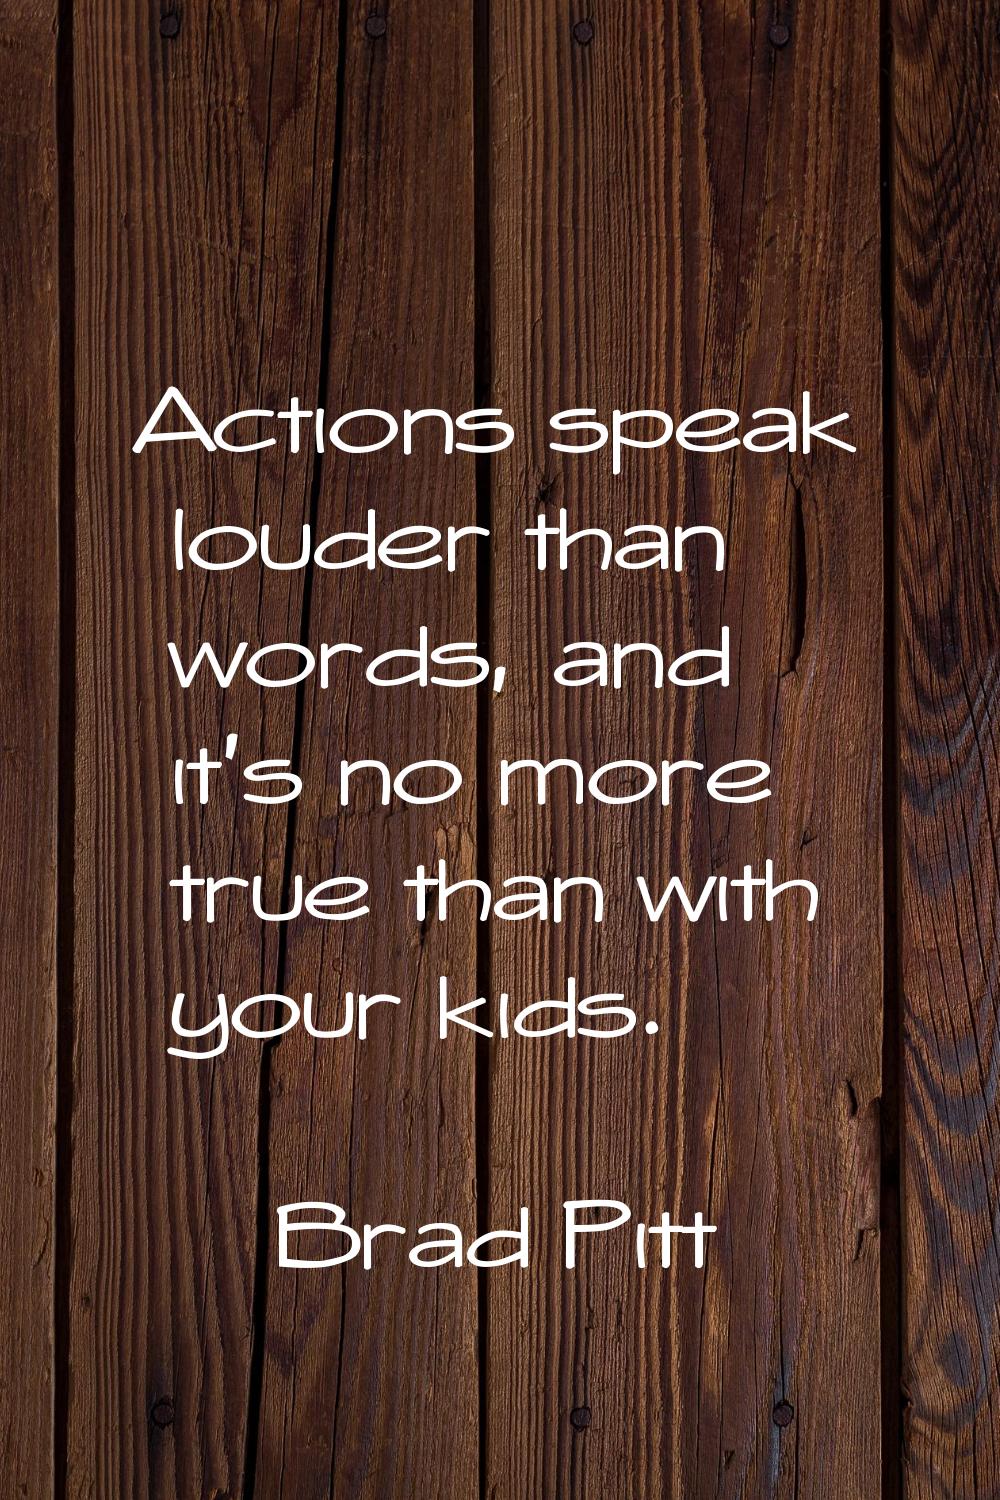 Actions speak louder than words, and it's no more true than with your kids.